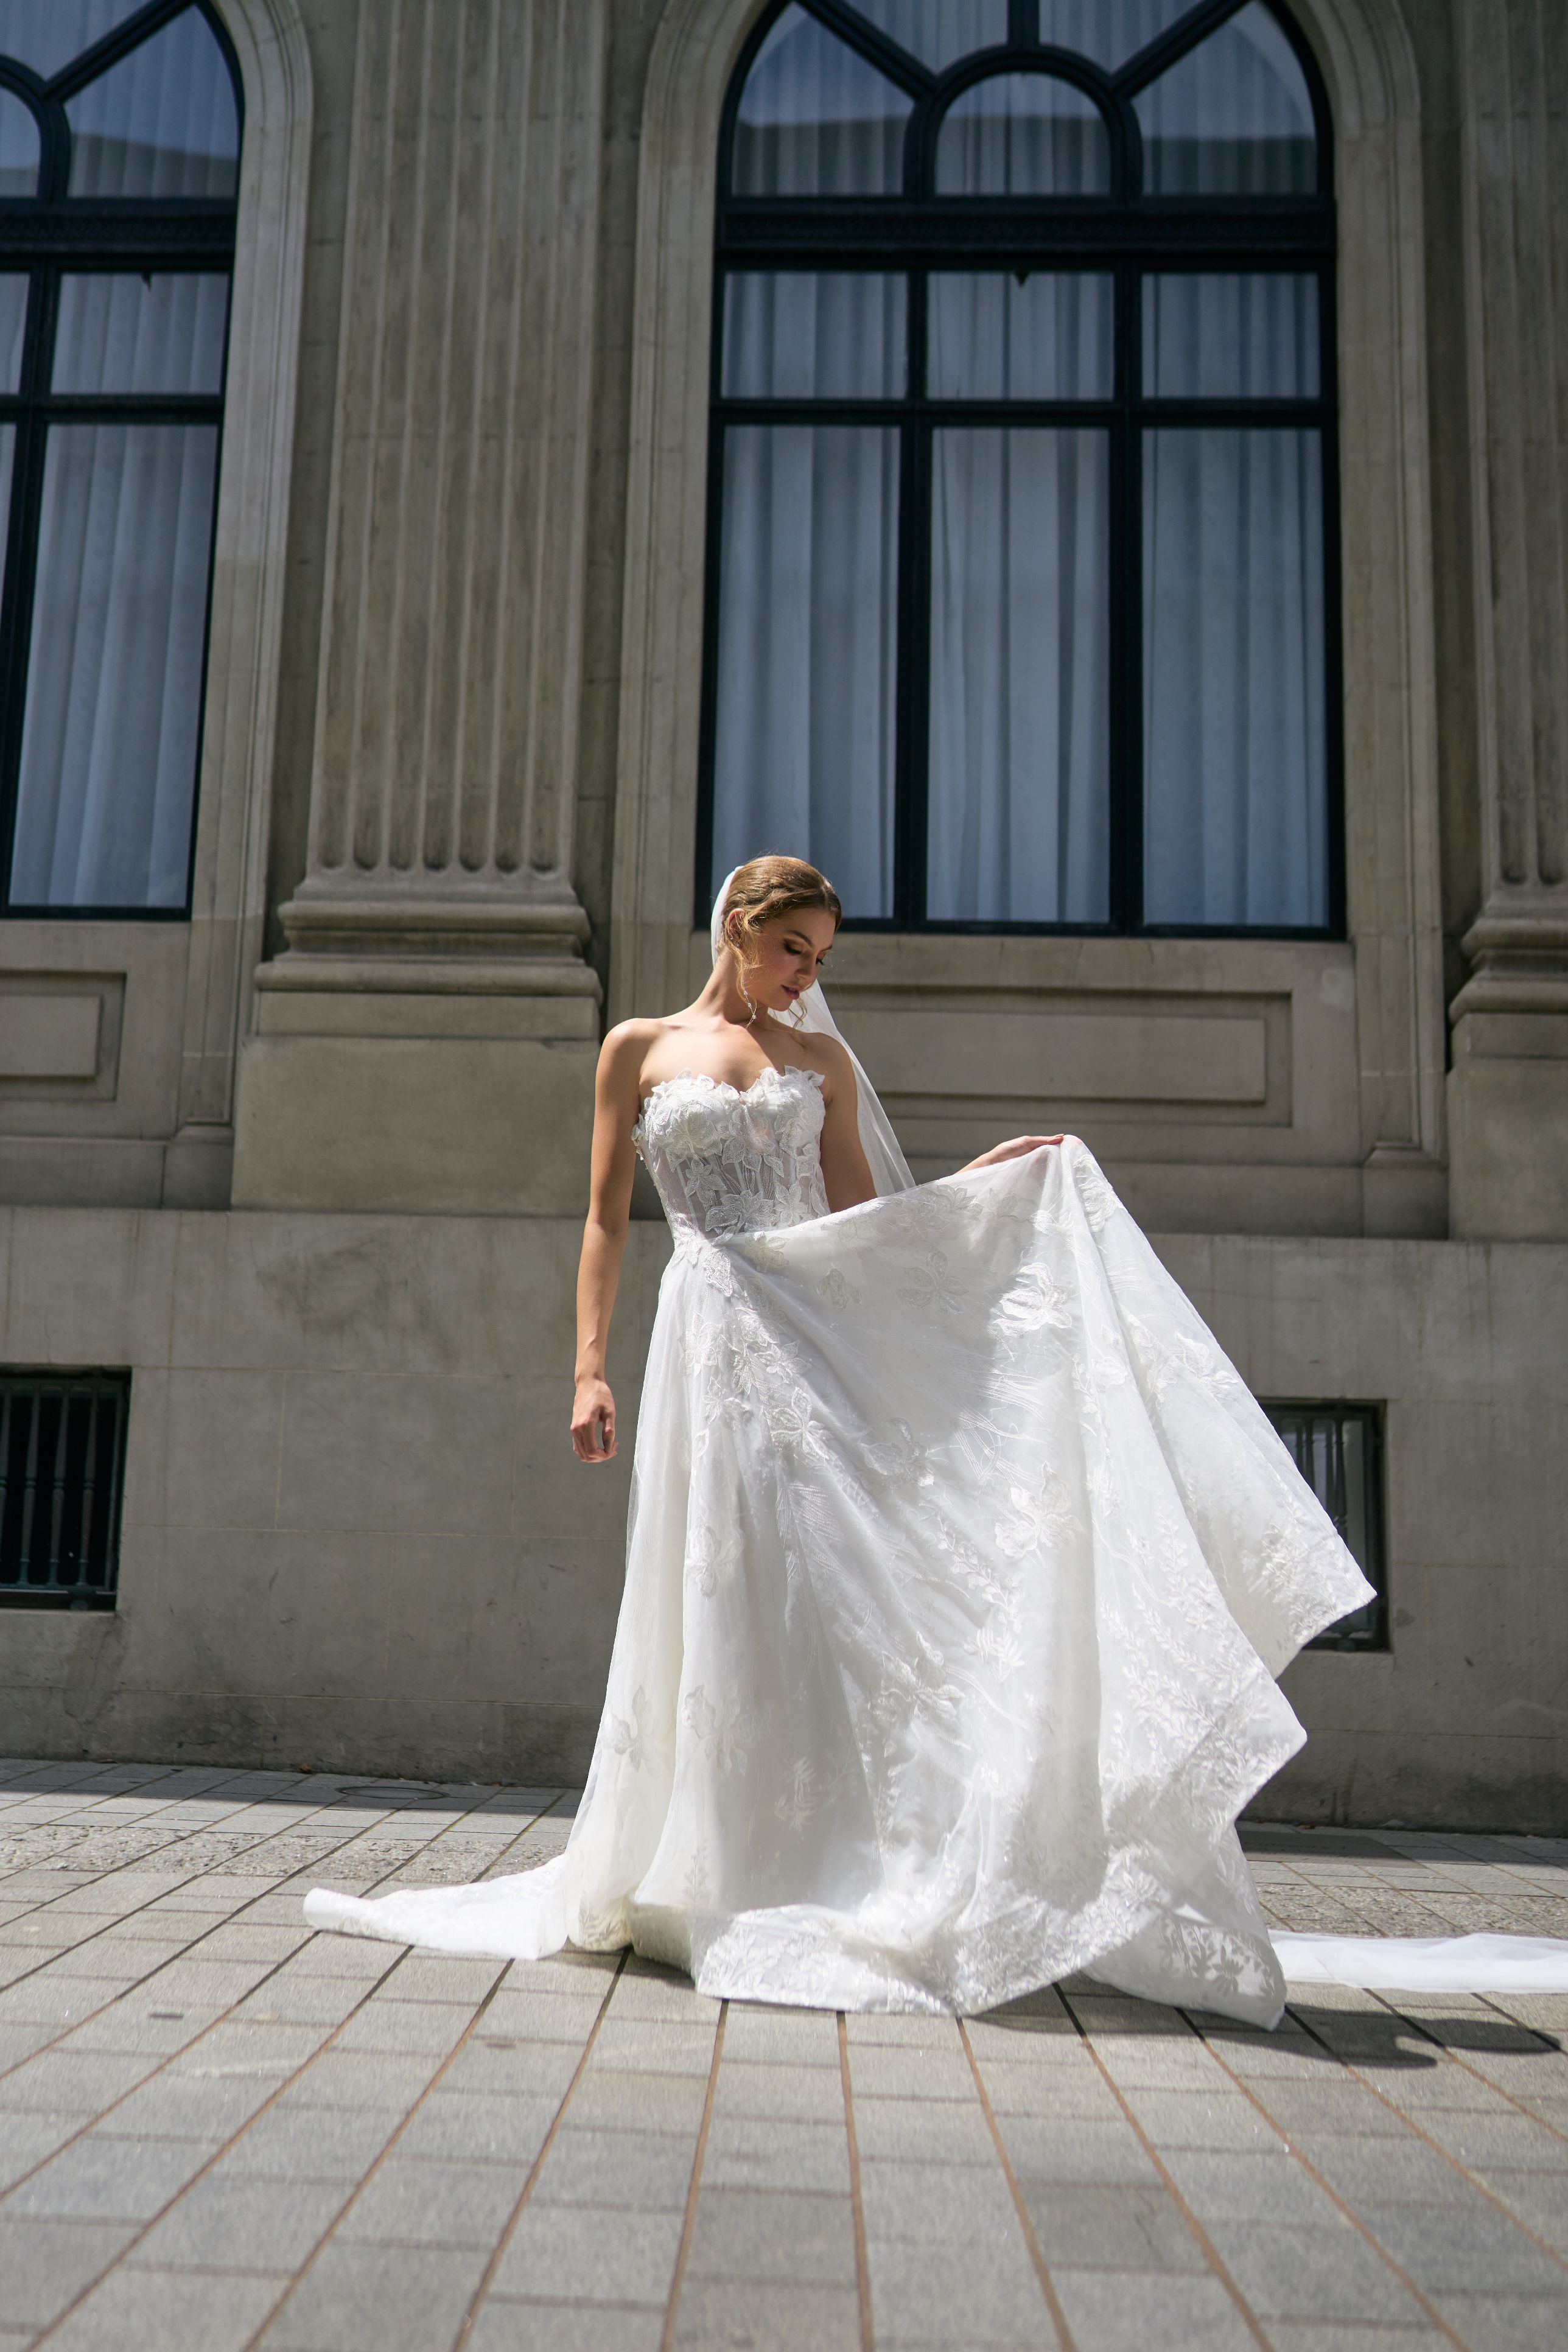 Renee wedding dress with unique A-line silhouette, crafted in floral fabric. Strapless design cinches at the waist for support at the décolletage. Flowy skirt adds lightness and luxury to the dress.